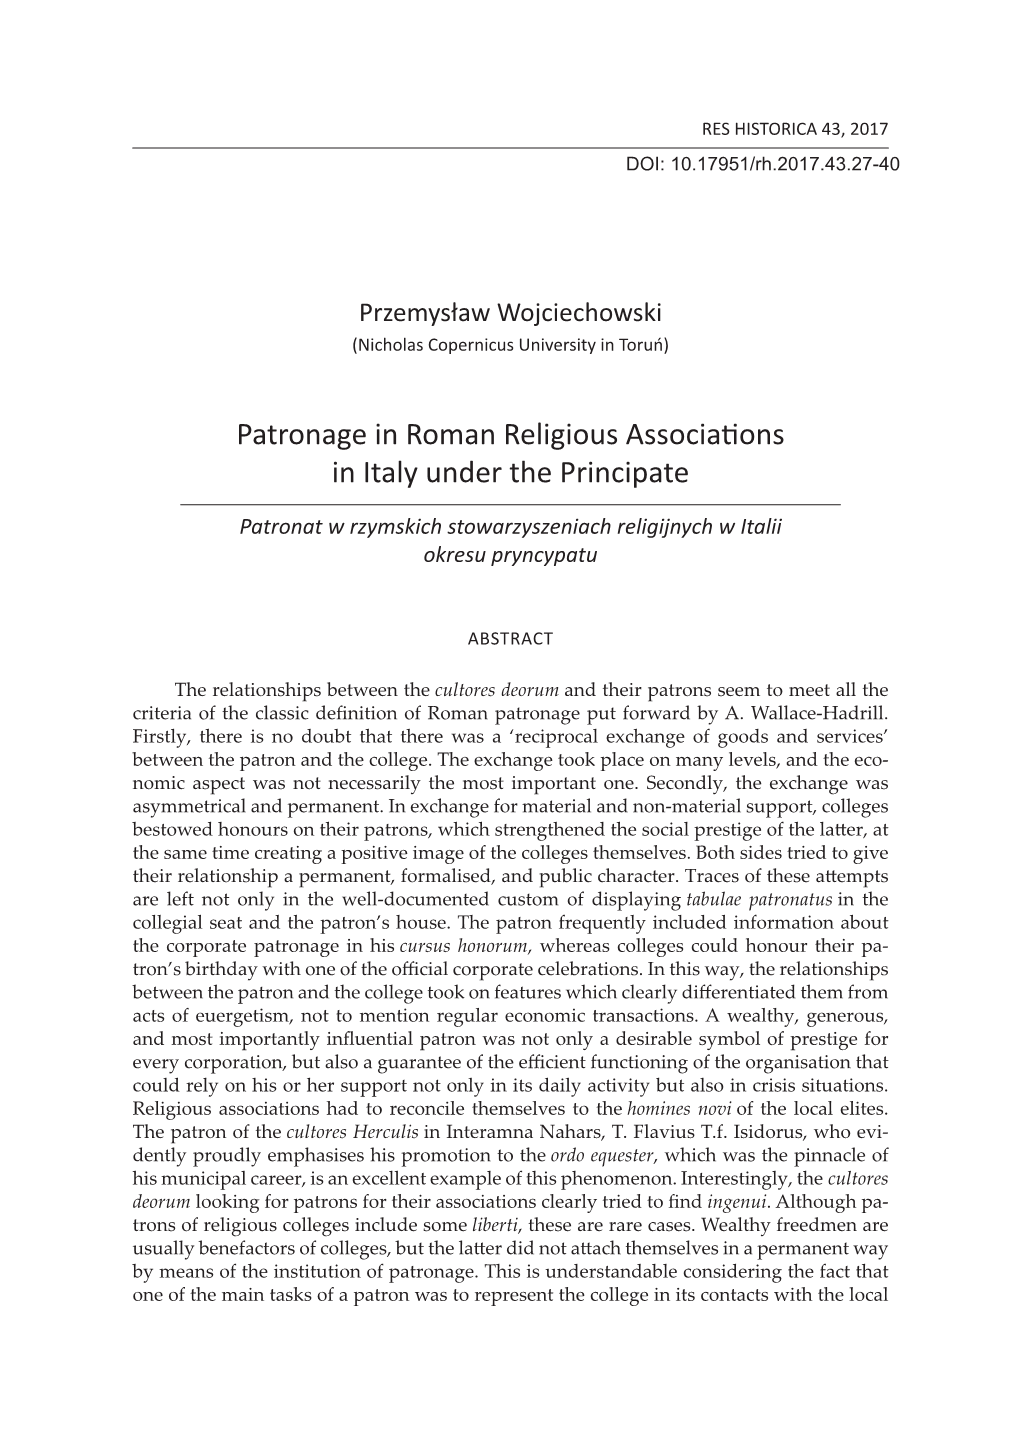 Patronage in Roman Religious Associations in Italy Under the Principate